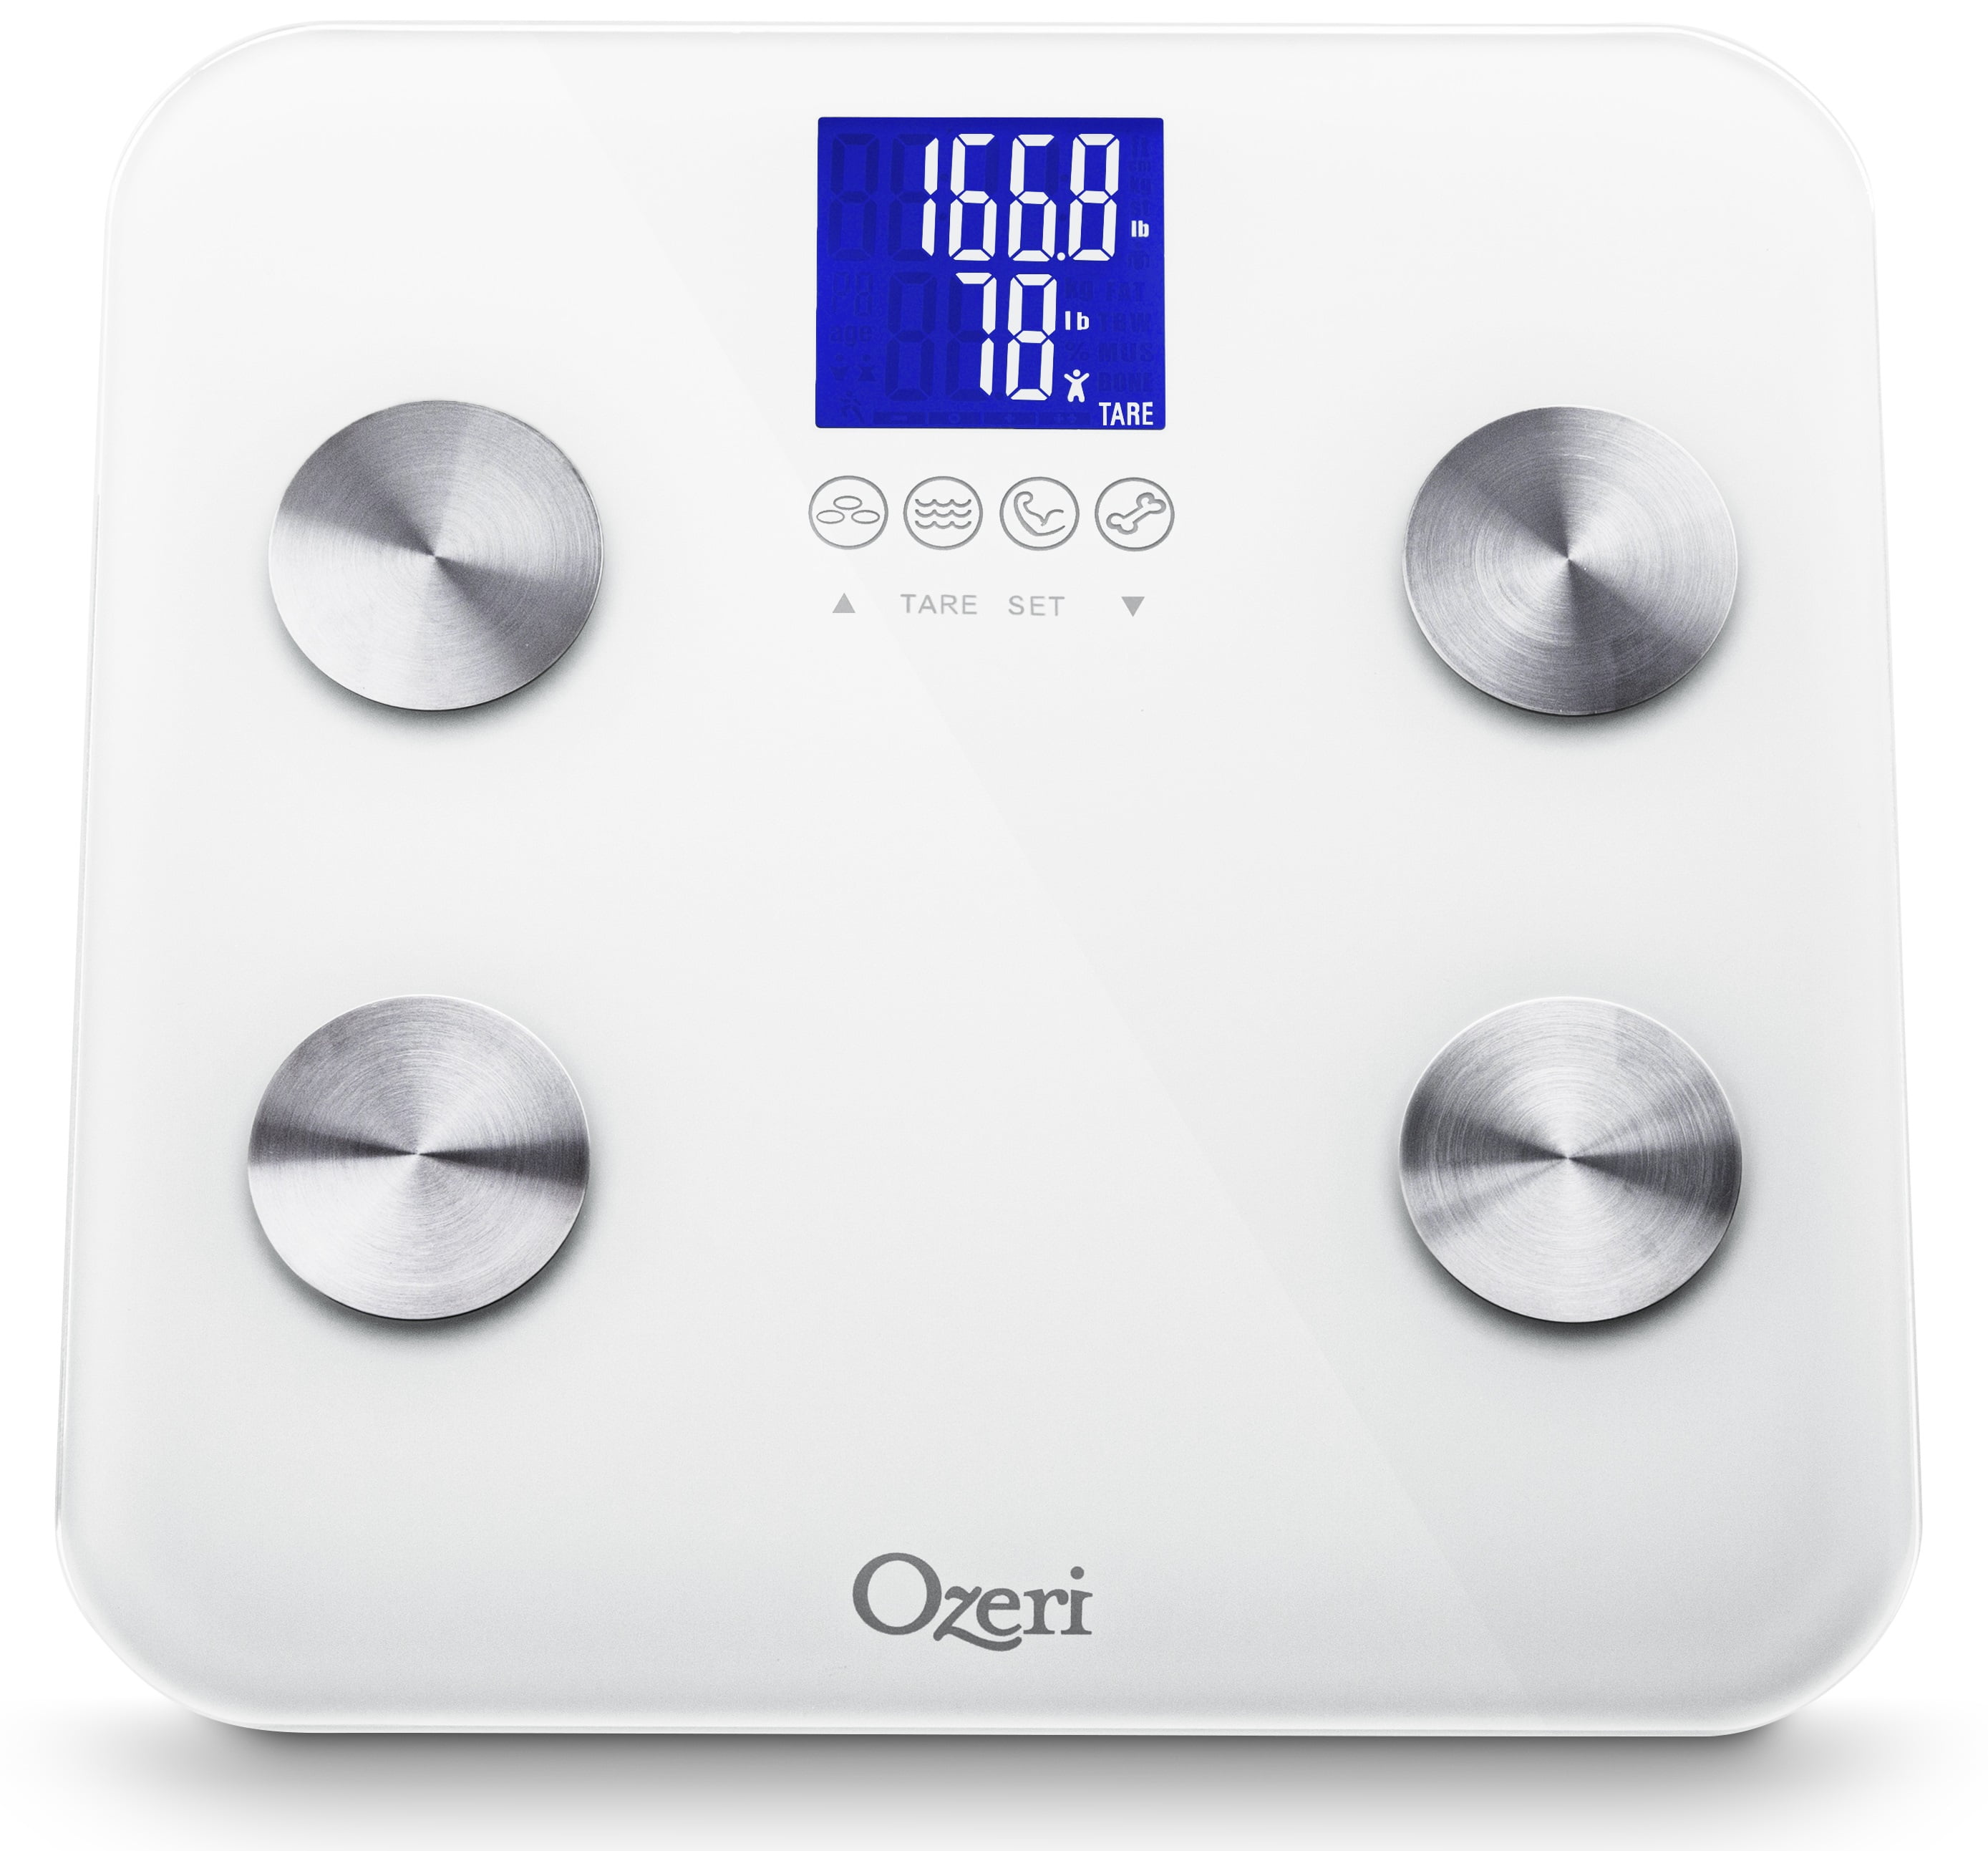 Ozeri Touch 200 KG Body Measures Weight 440 LBS Total Body Bathroom Scale 